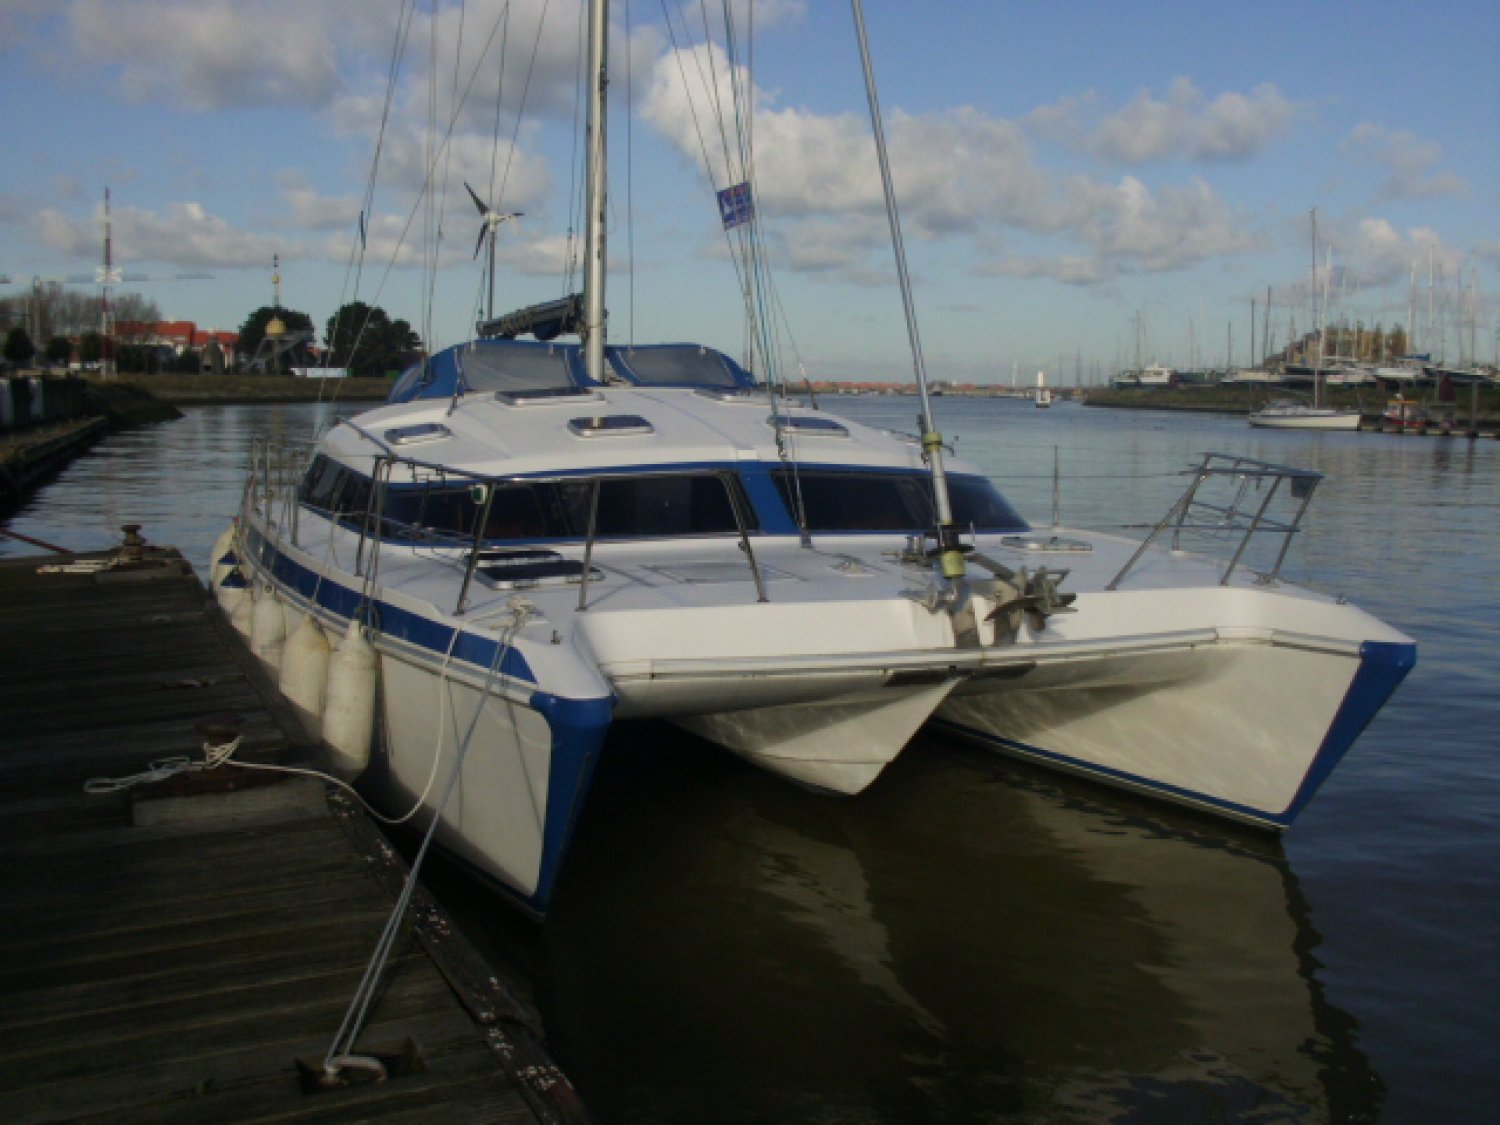 prout catamaran for sale by owner